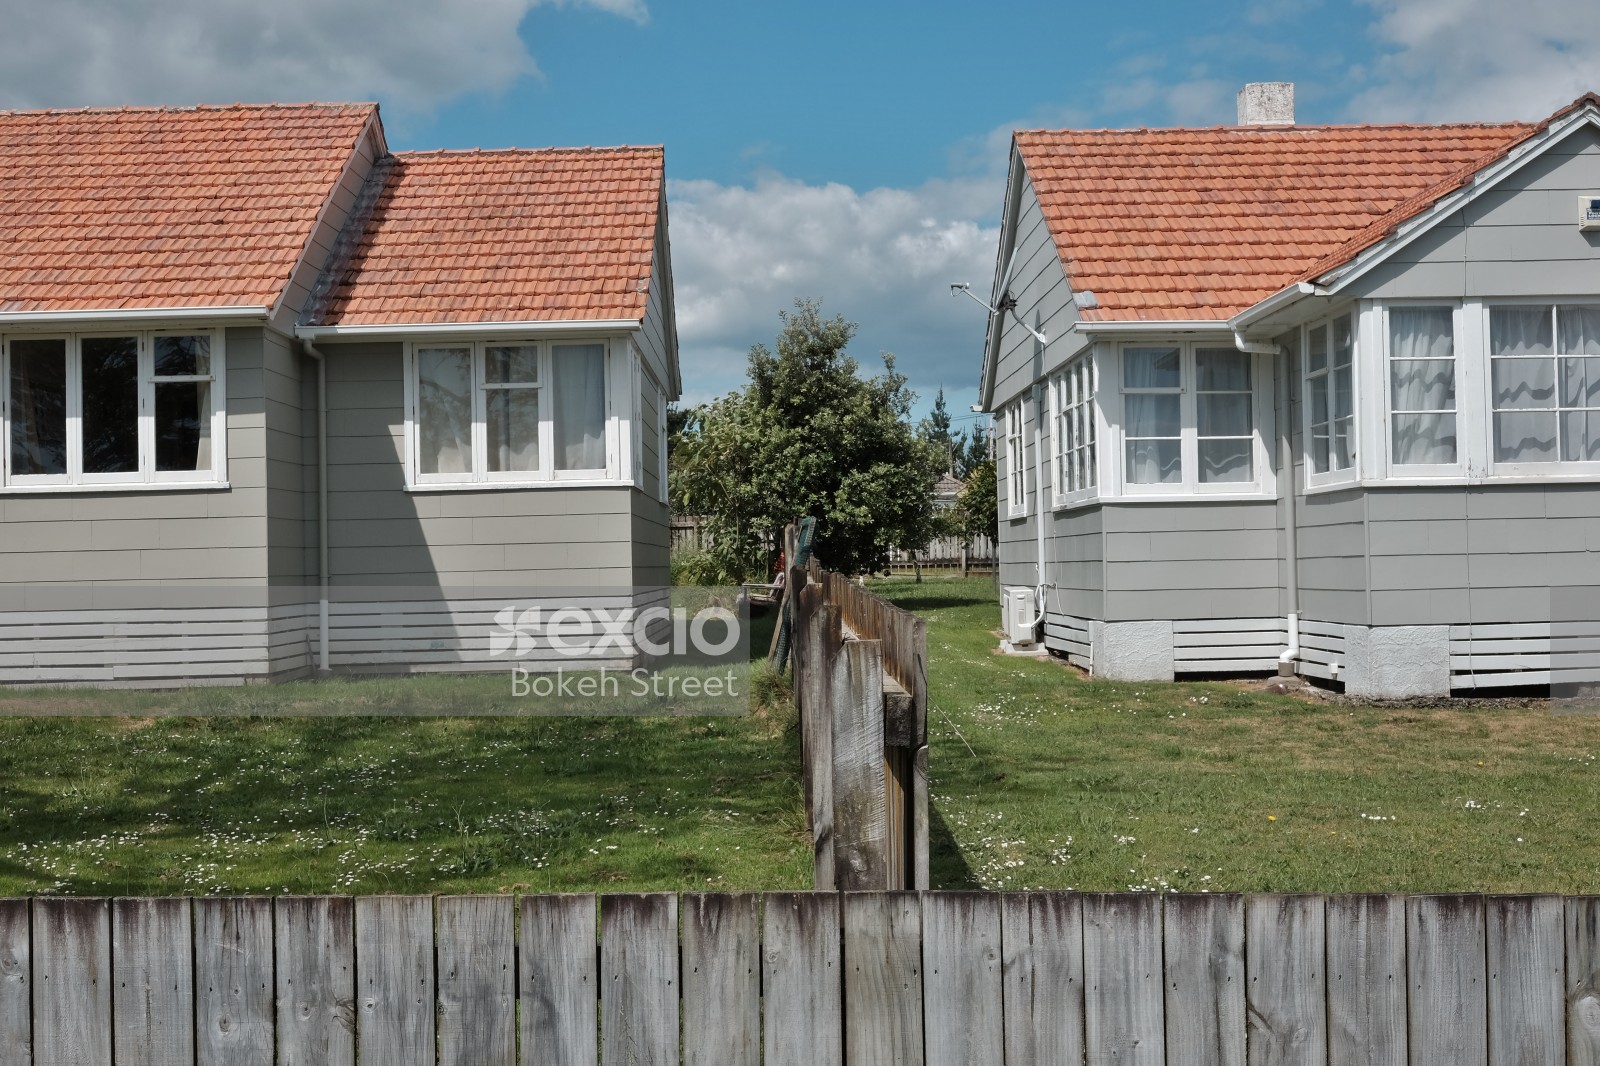 Backyard of two state houses and wooden fence